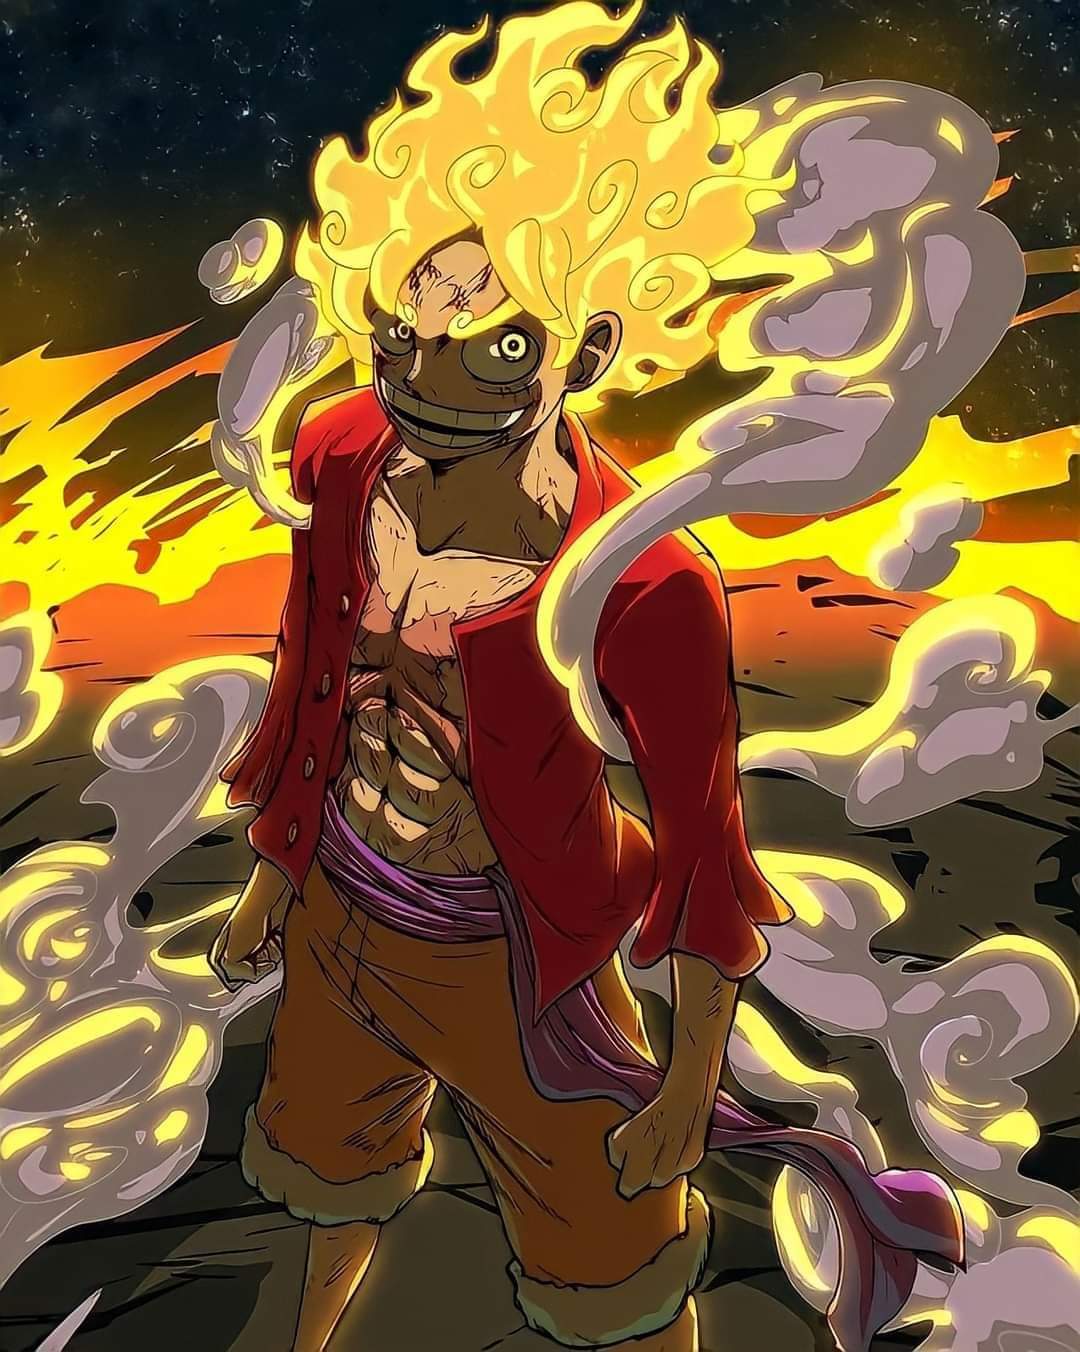 Luffy Gear 5 fan art that is really worth checking out.